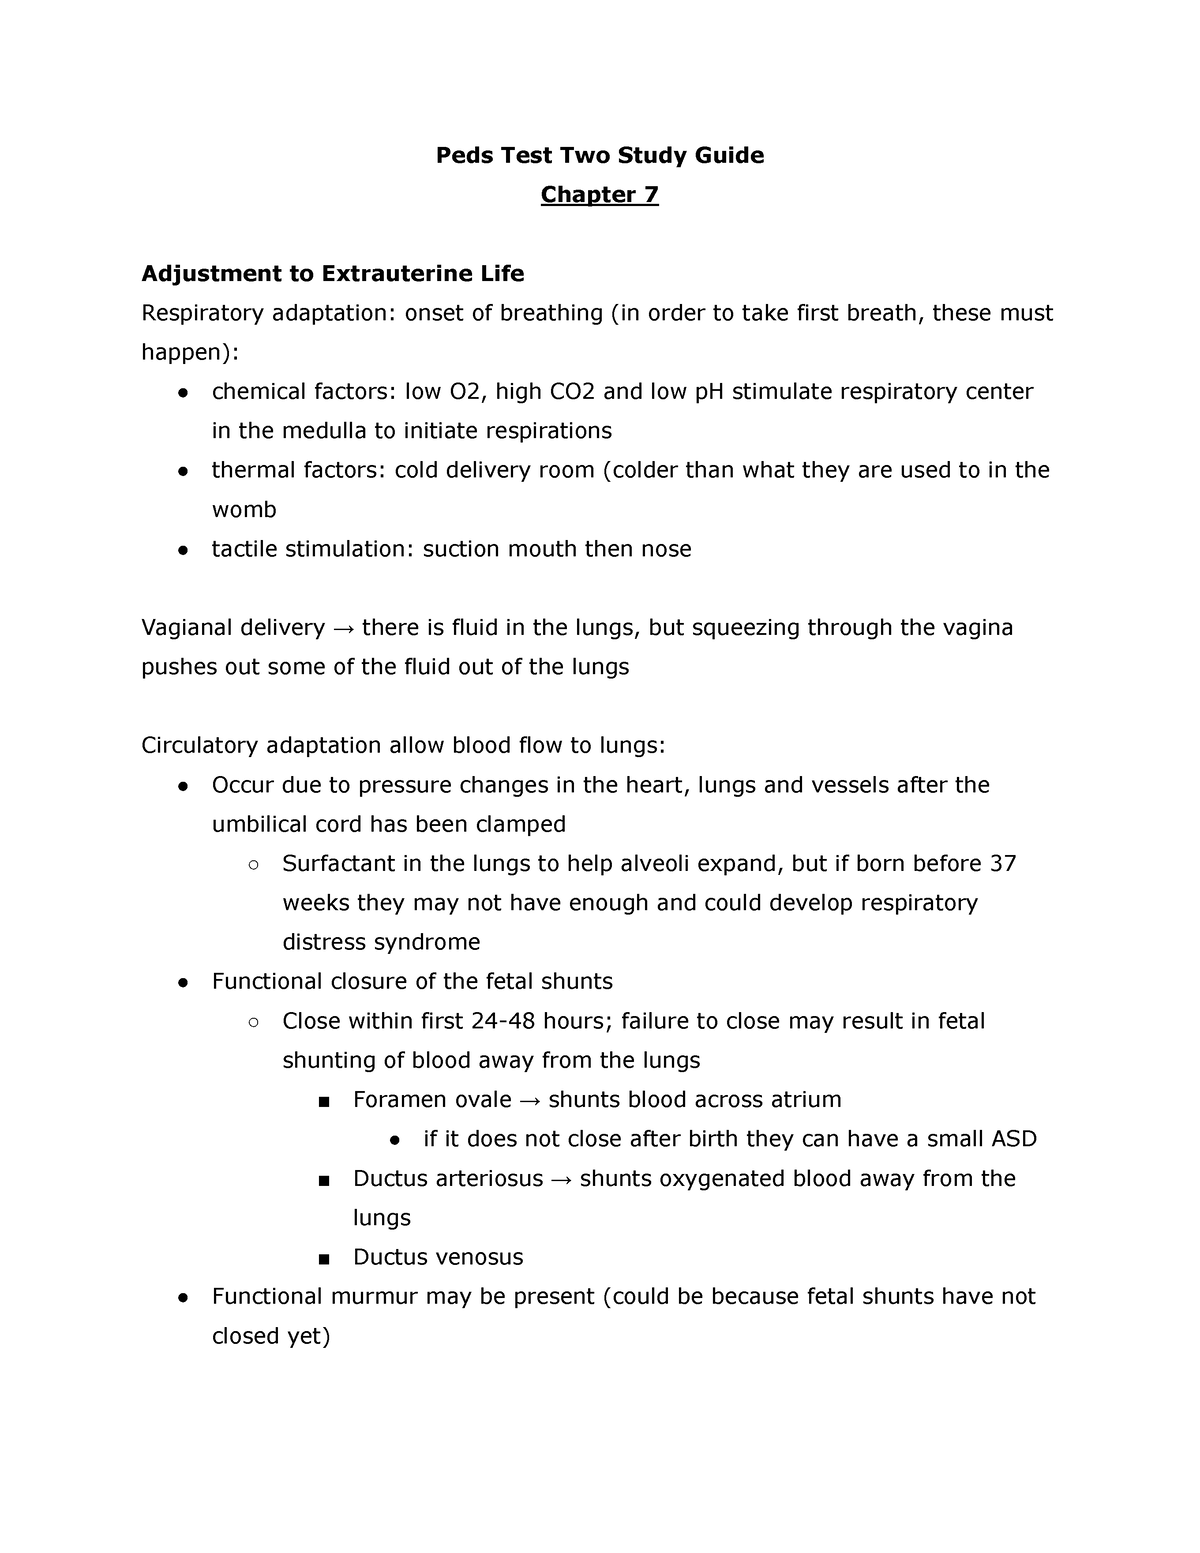 Peds Test Two Study Guide - Peds Test Two Study Guide Chapter 7 ...